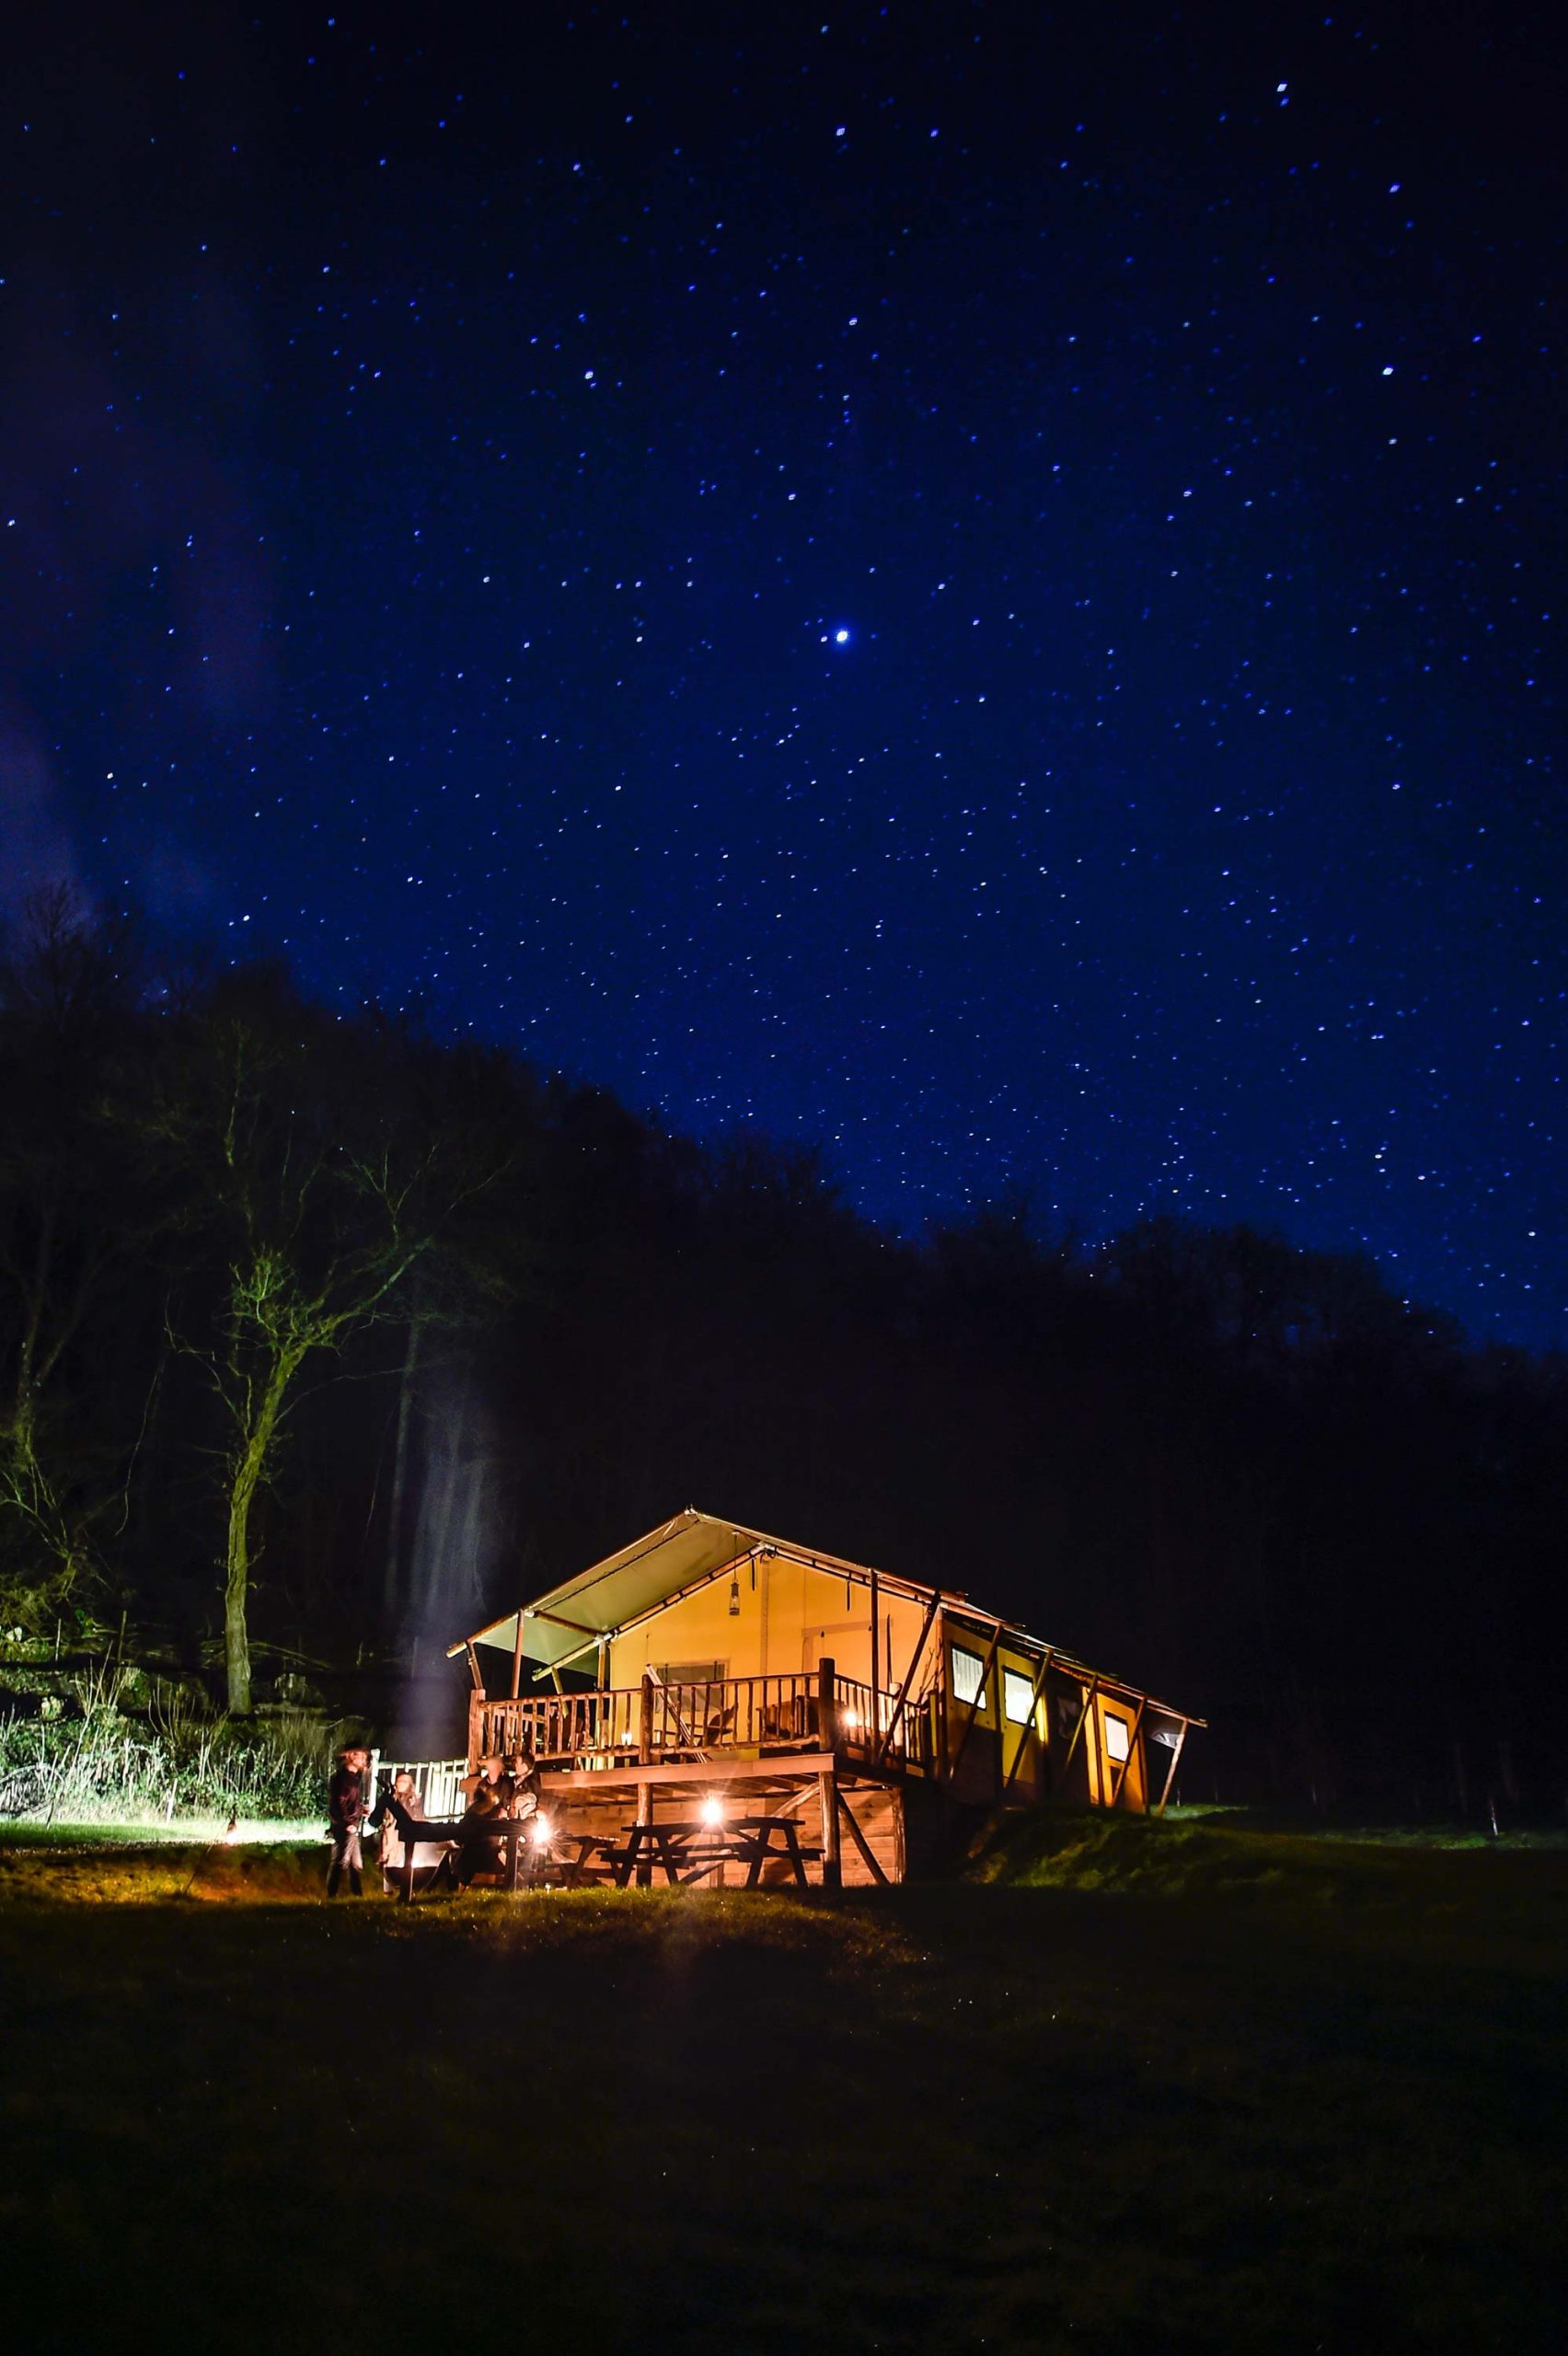 Guests sitting on benches outside their Lodge at Loose Reins and looking up at the night sky